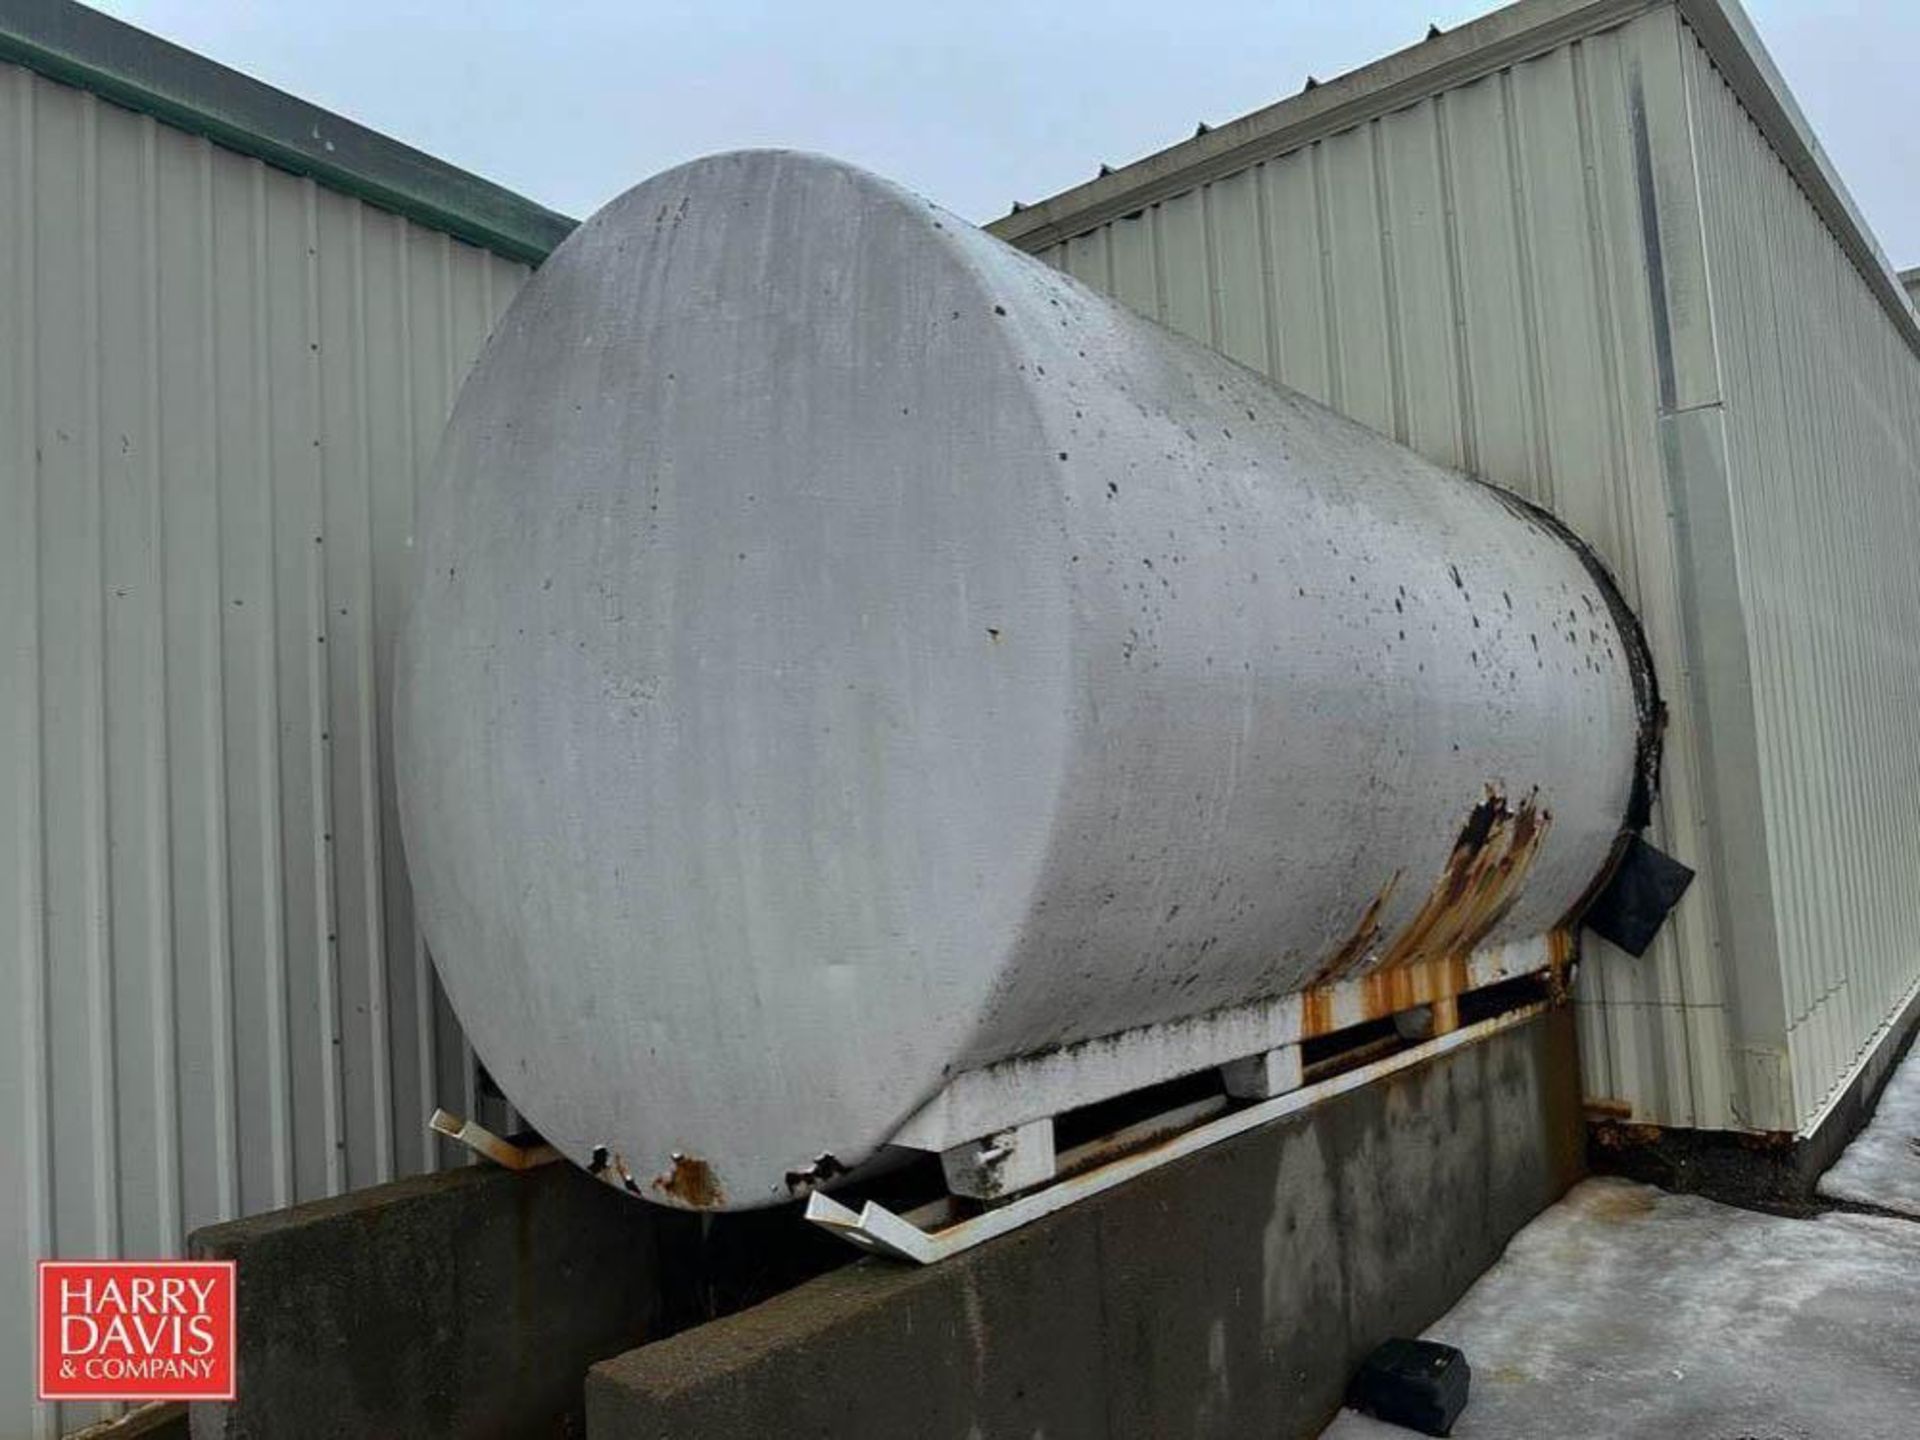 4,000 Gallon Horizontal S/S Tank with (2) Butterfly Valves - Rigging Fee: $4,000 - Image 2 of 2